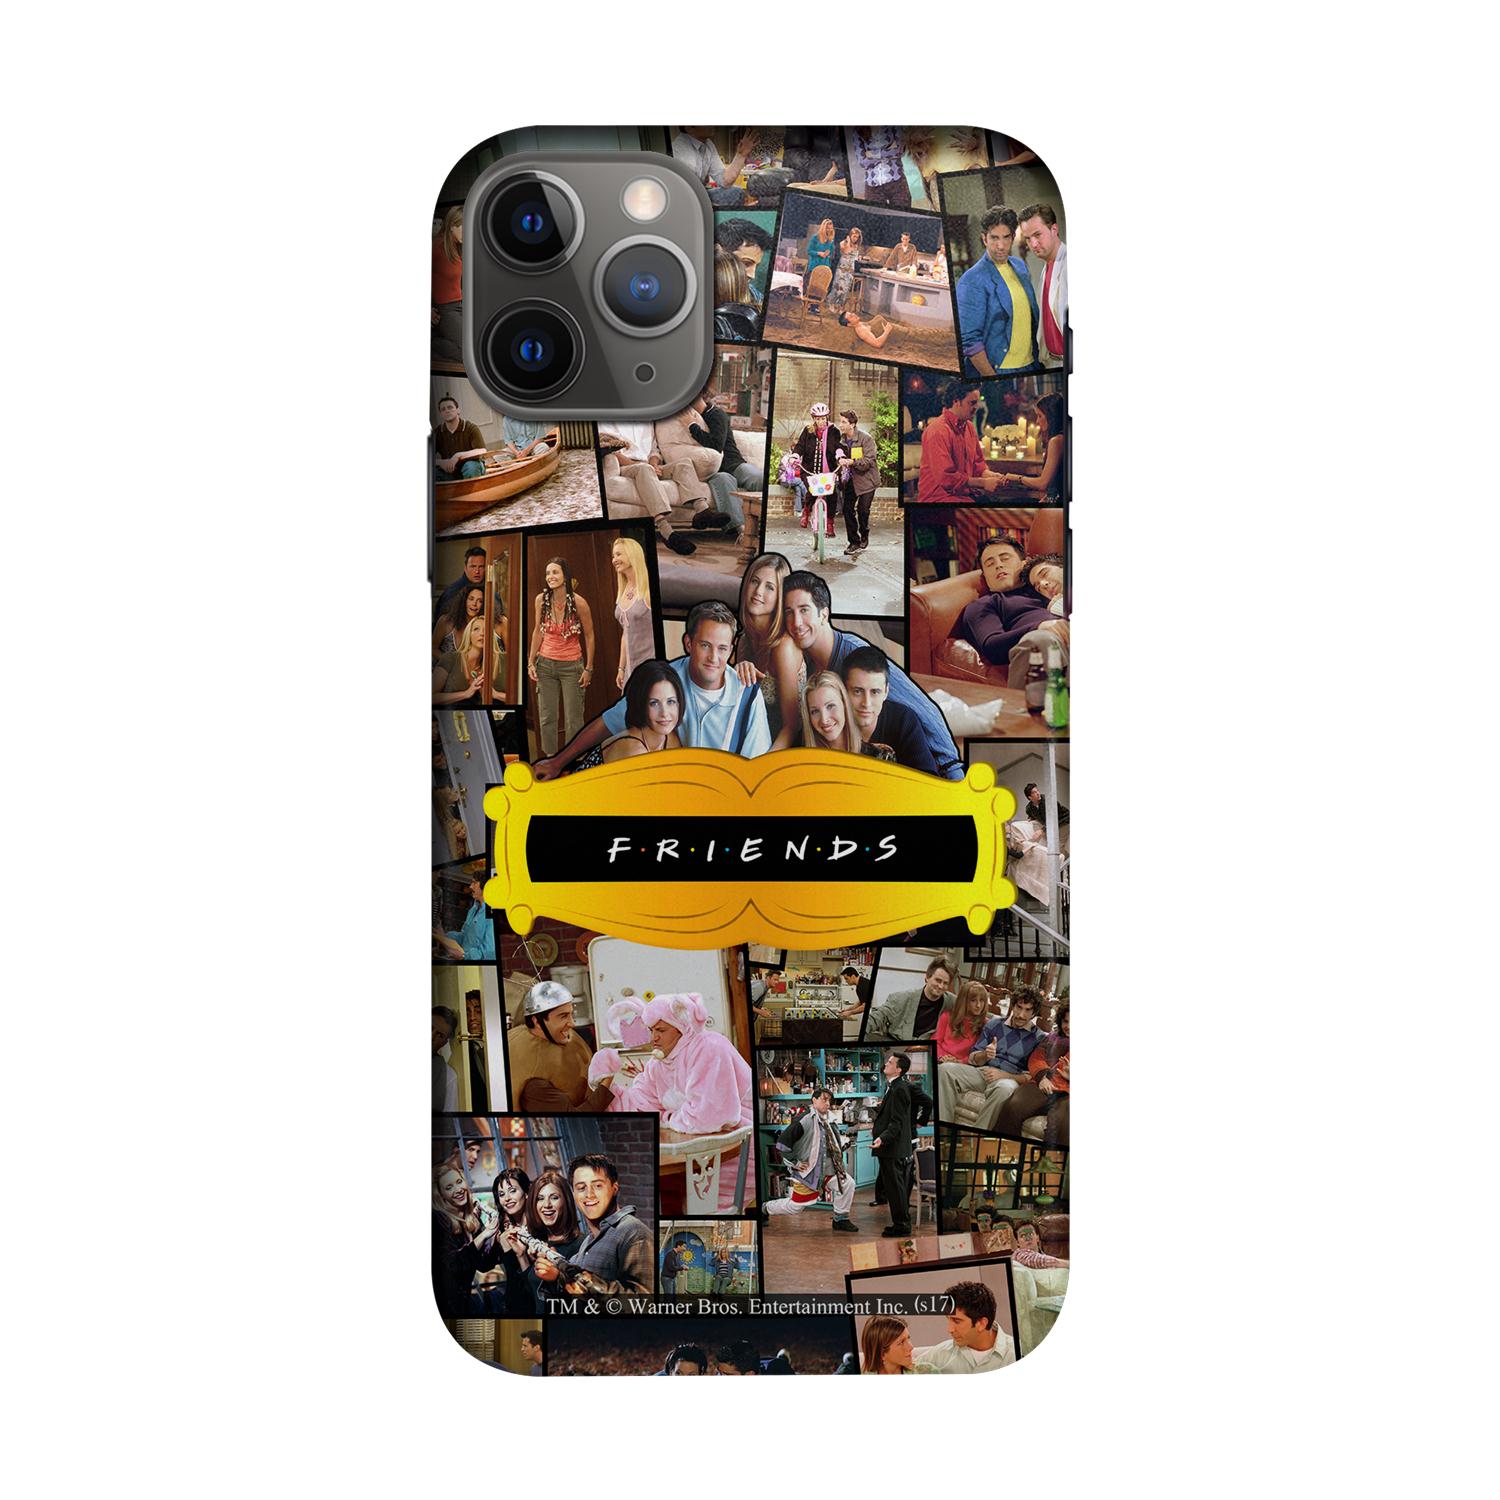 Buy Friends Collage - Sleek Phone Case for iPhone 11 Pro Max Online